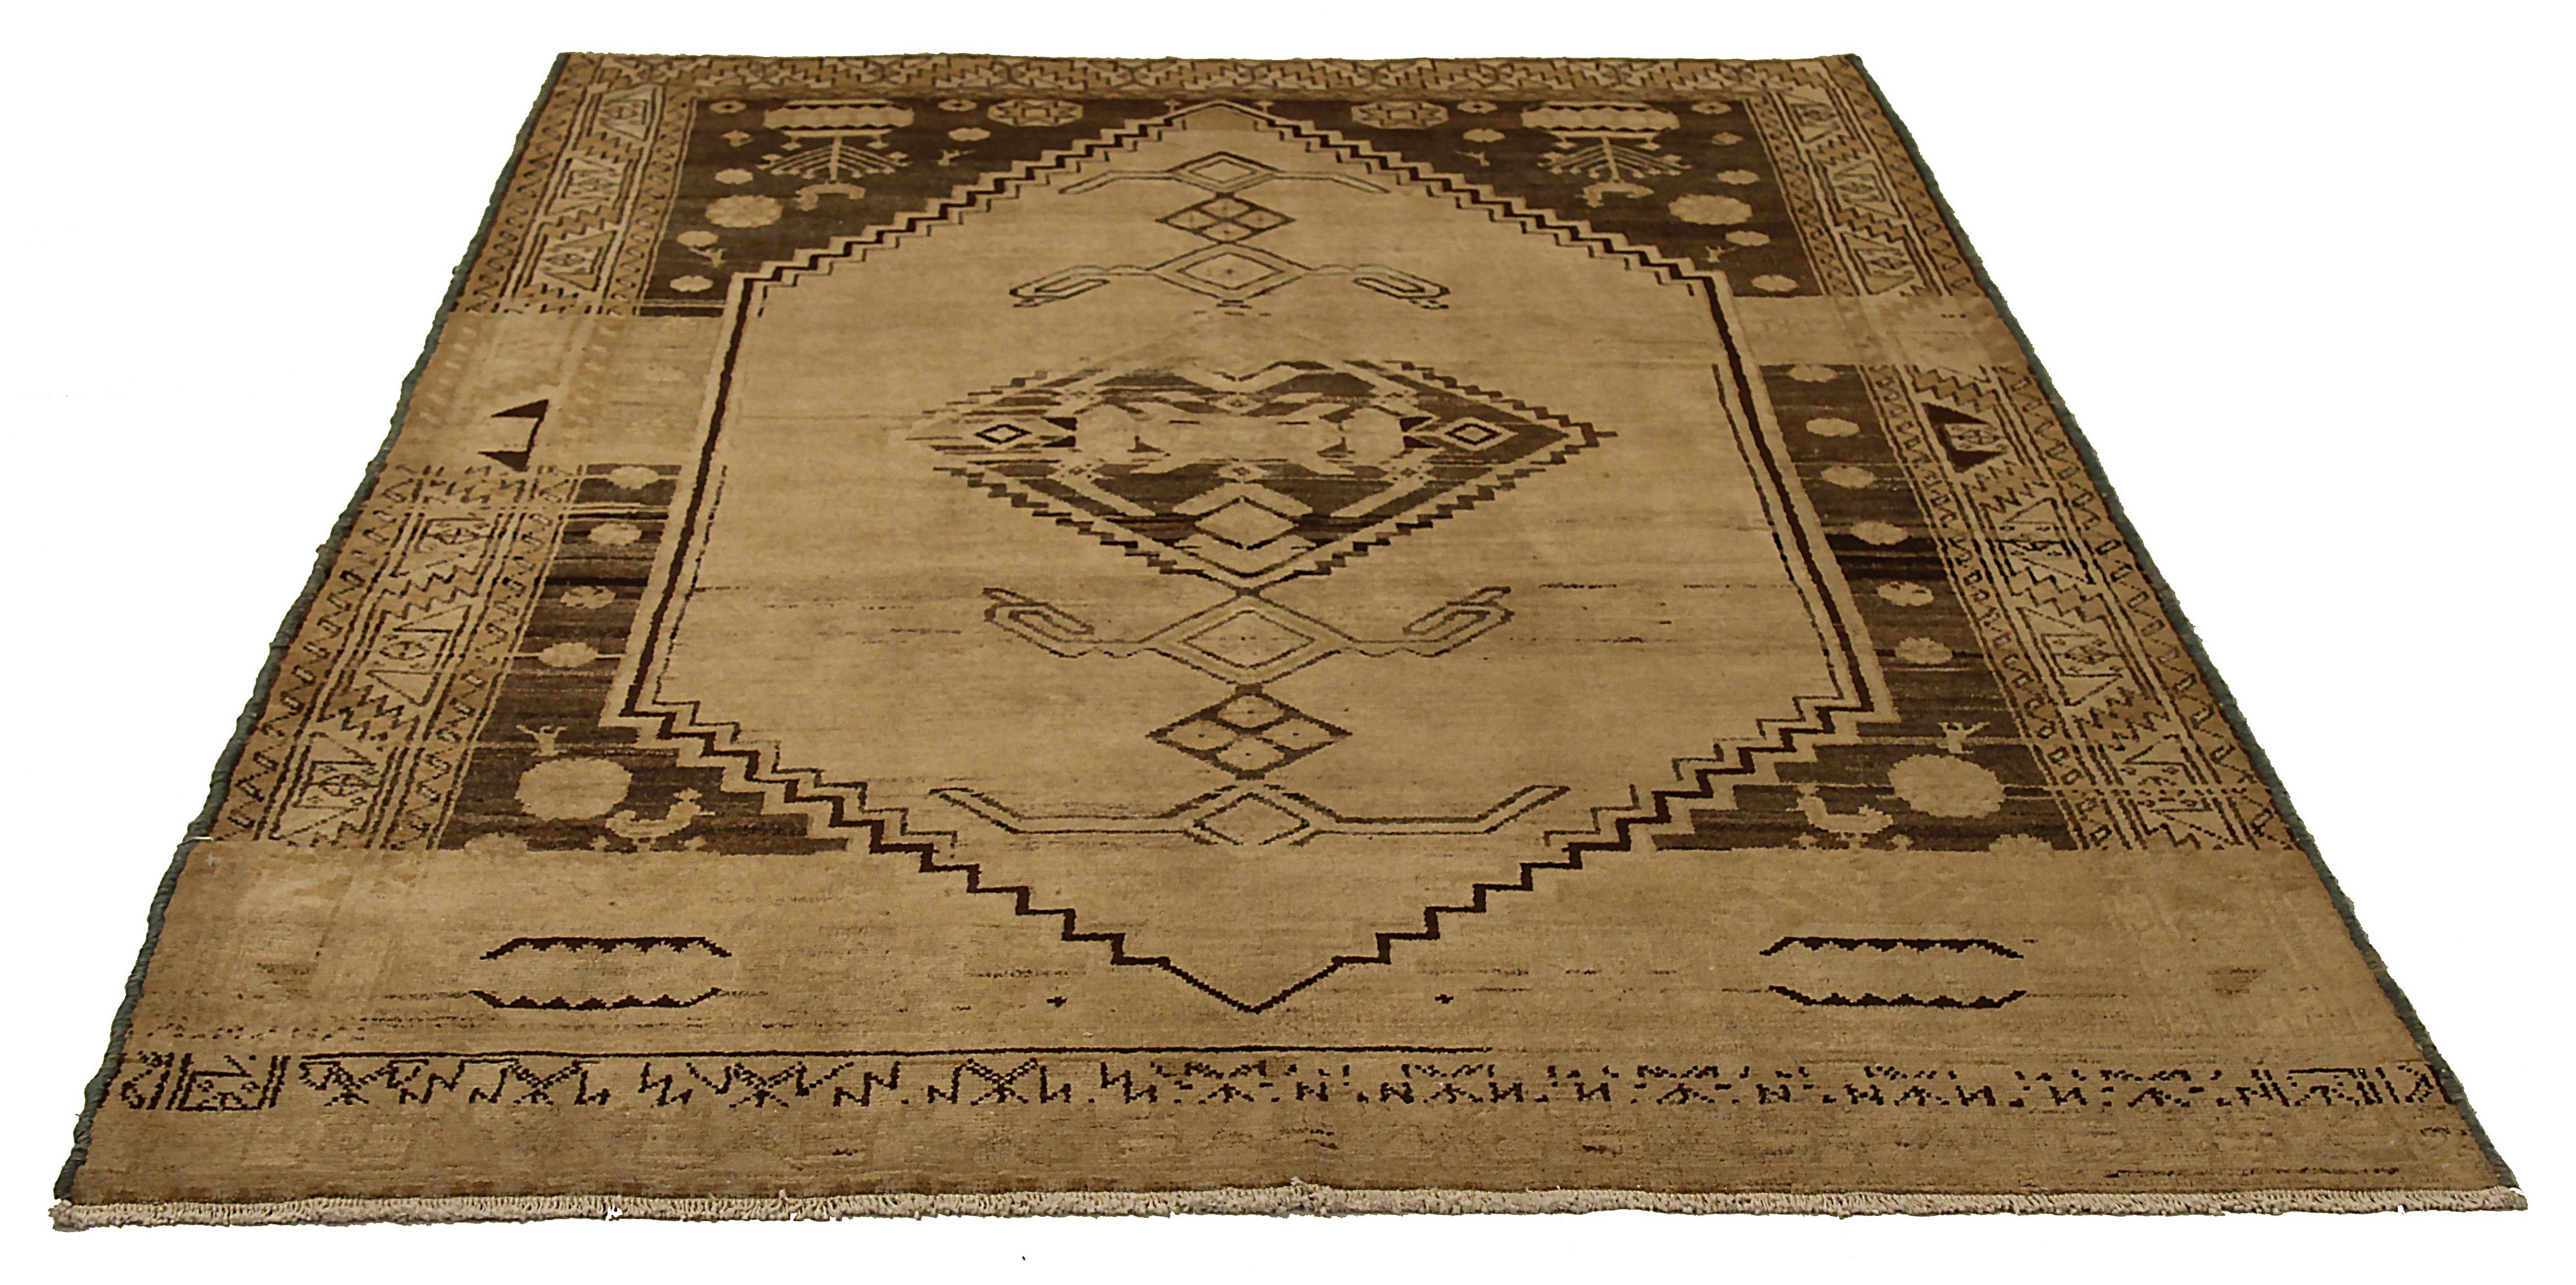 Antique Persian rug handwoven from the finest sheep’s wool and colored with all-natural vegetable dyes that are safe for humans and pets. It’s a traditional Bibikabad design featuring geometric and tribal details in brown a beige field. It’s a